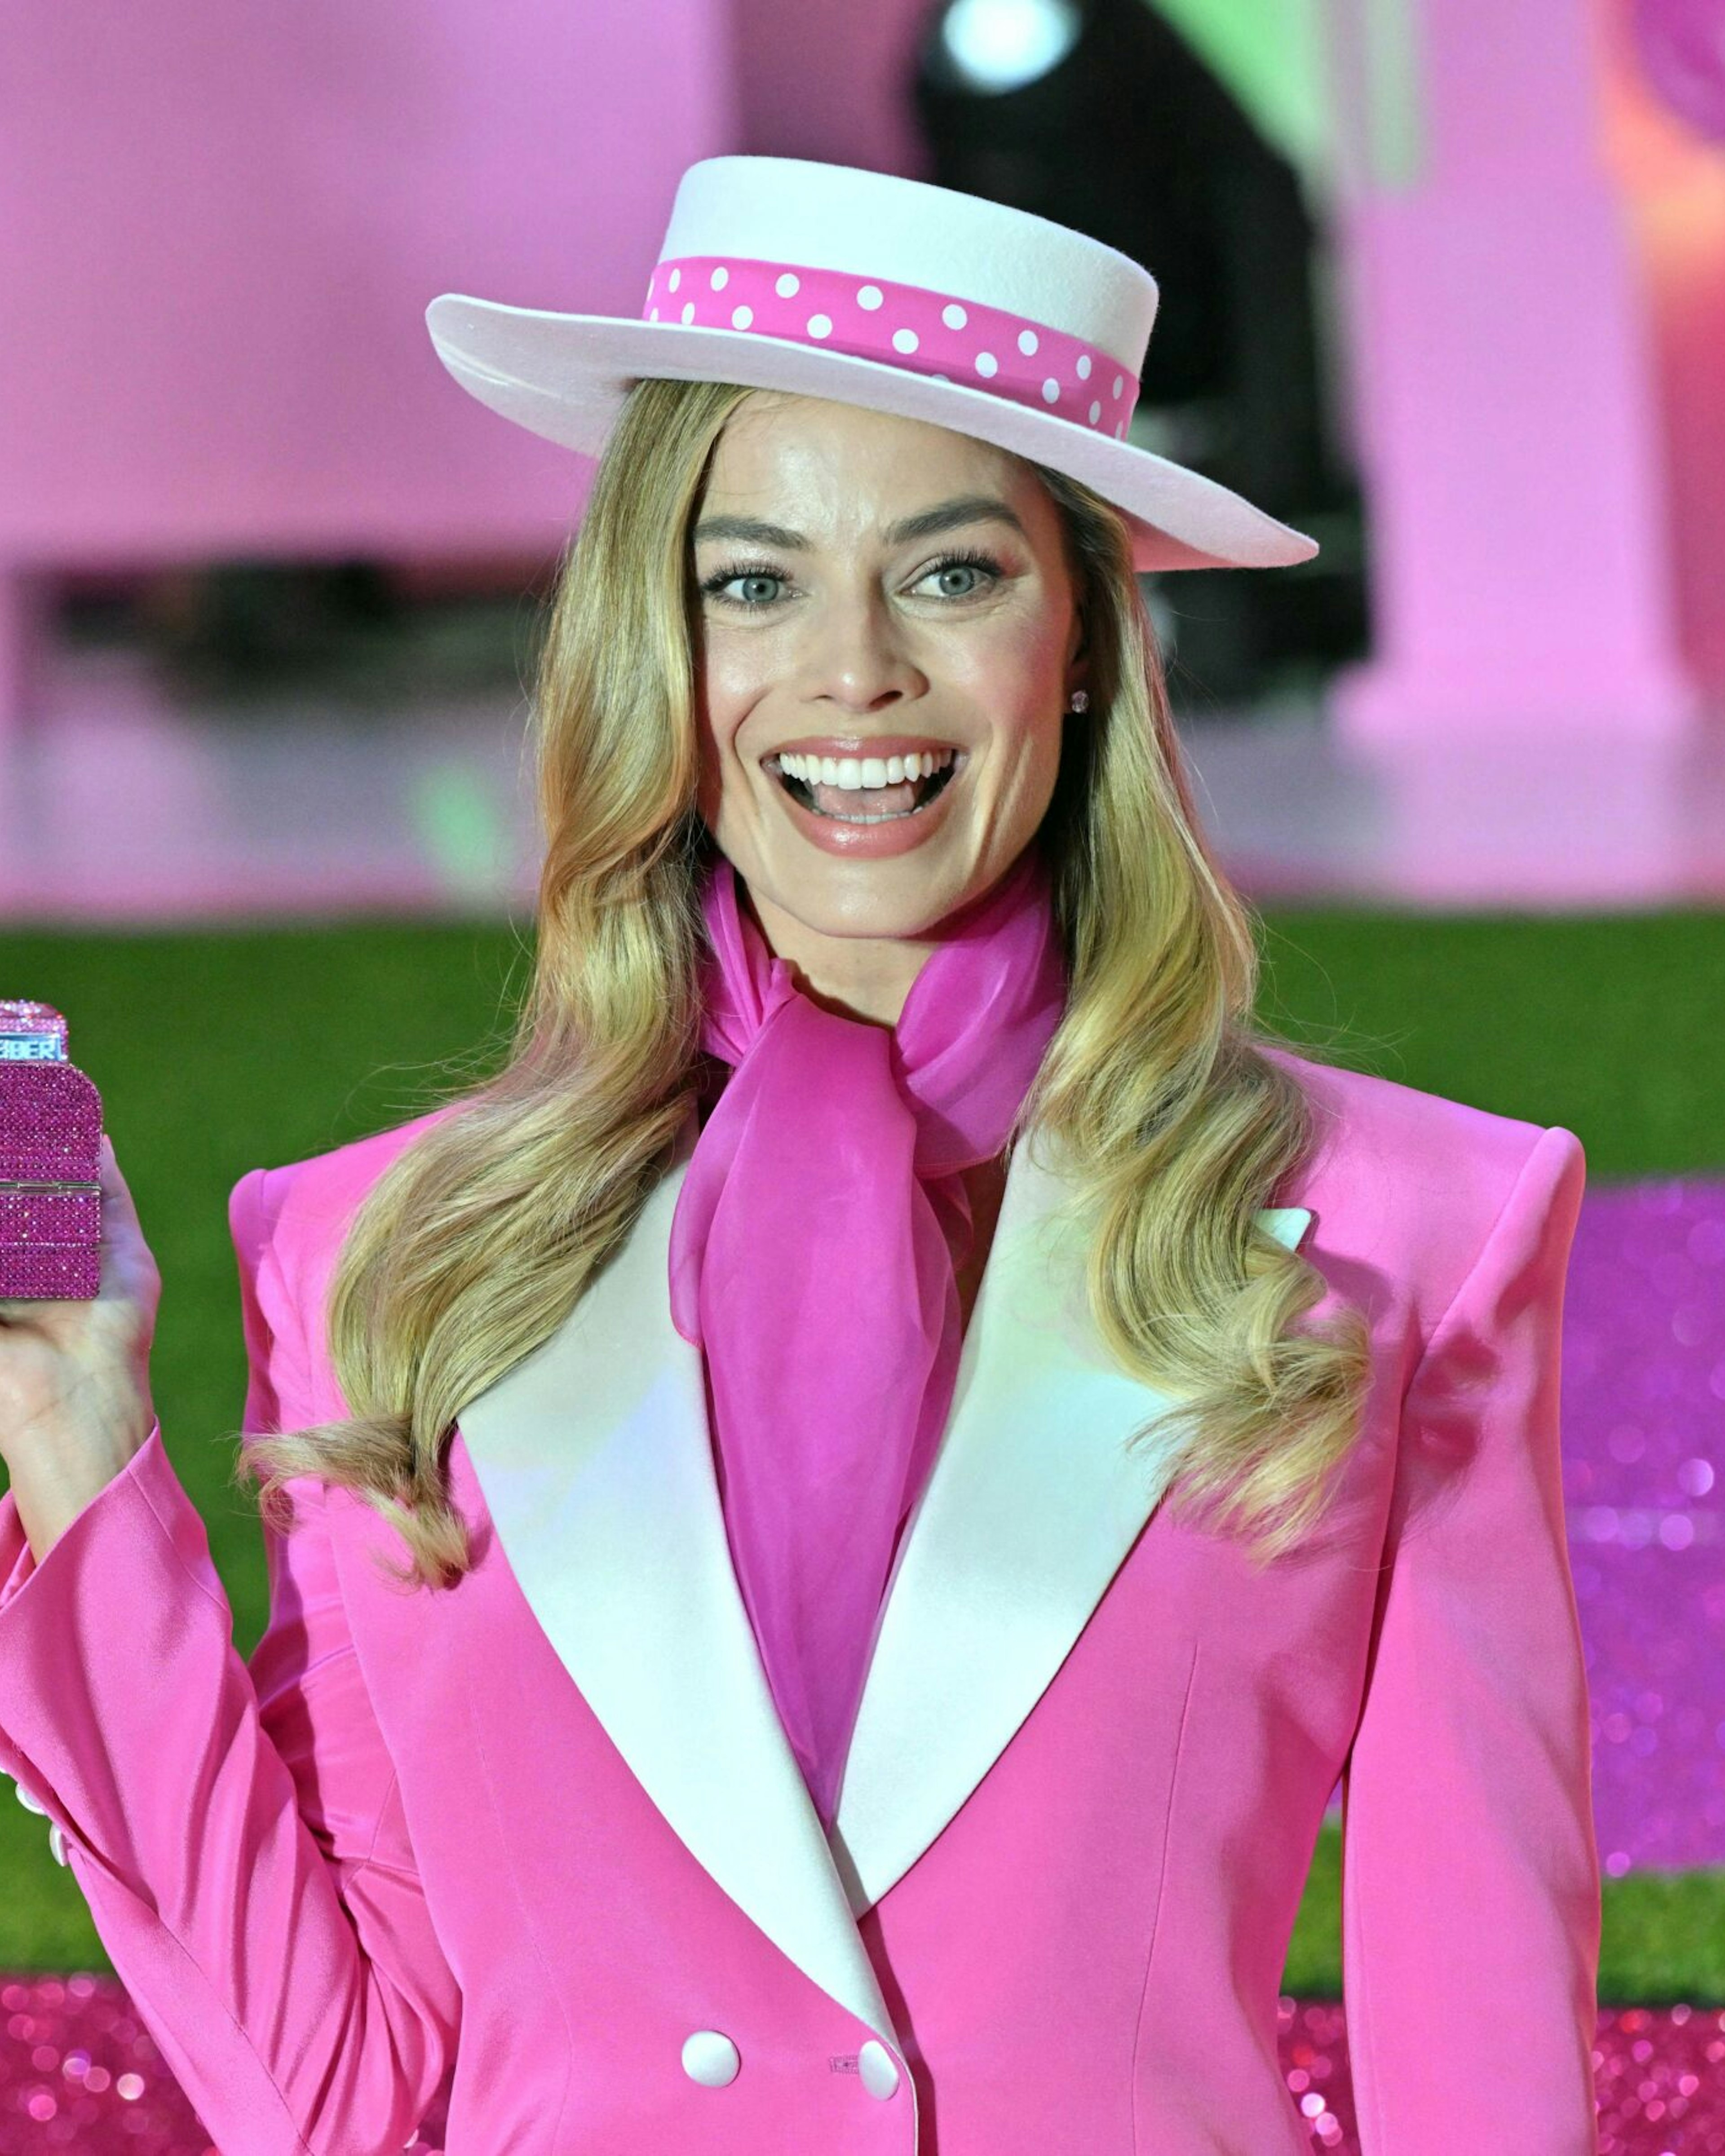 Australian actress Margot Robbie poses for a photo during a pink carpet event to promote her new film "Barbie" in Seoul on July 2, 2023. (Photo by Jung Yeon-je / AFP) (Photo by JUNG YEON-JE/AFP via Getty Images)